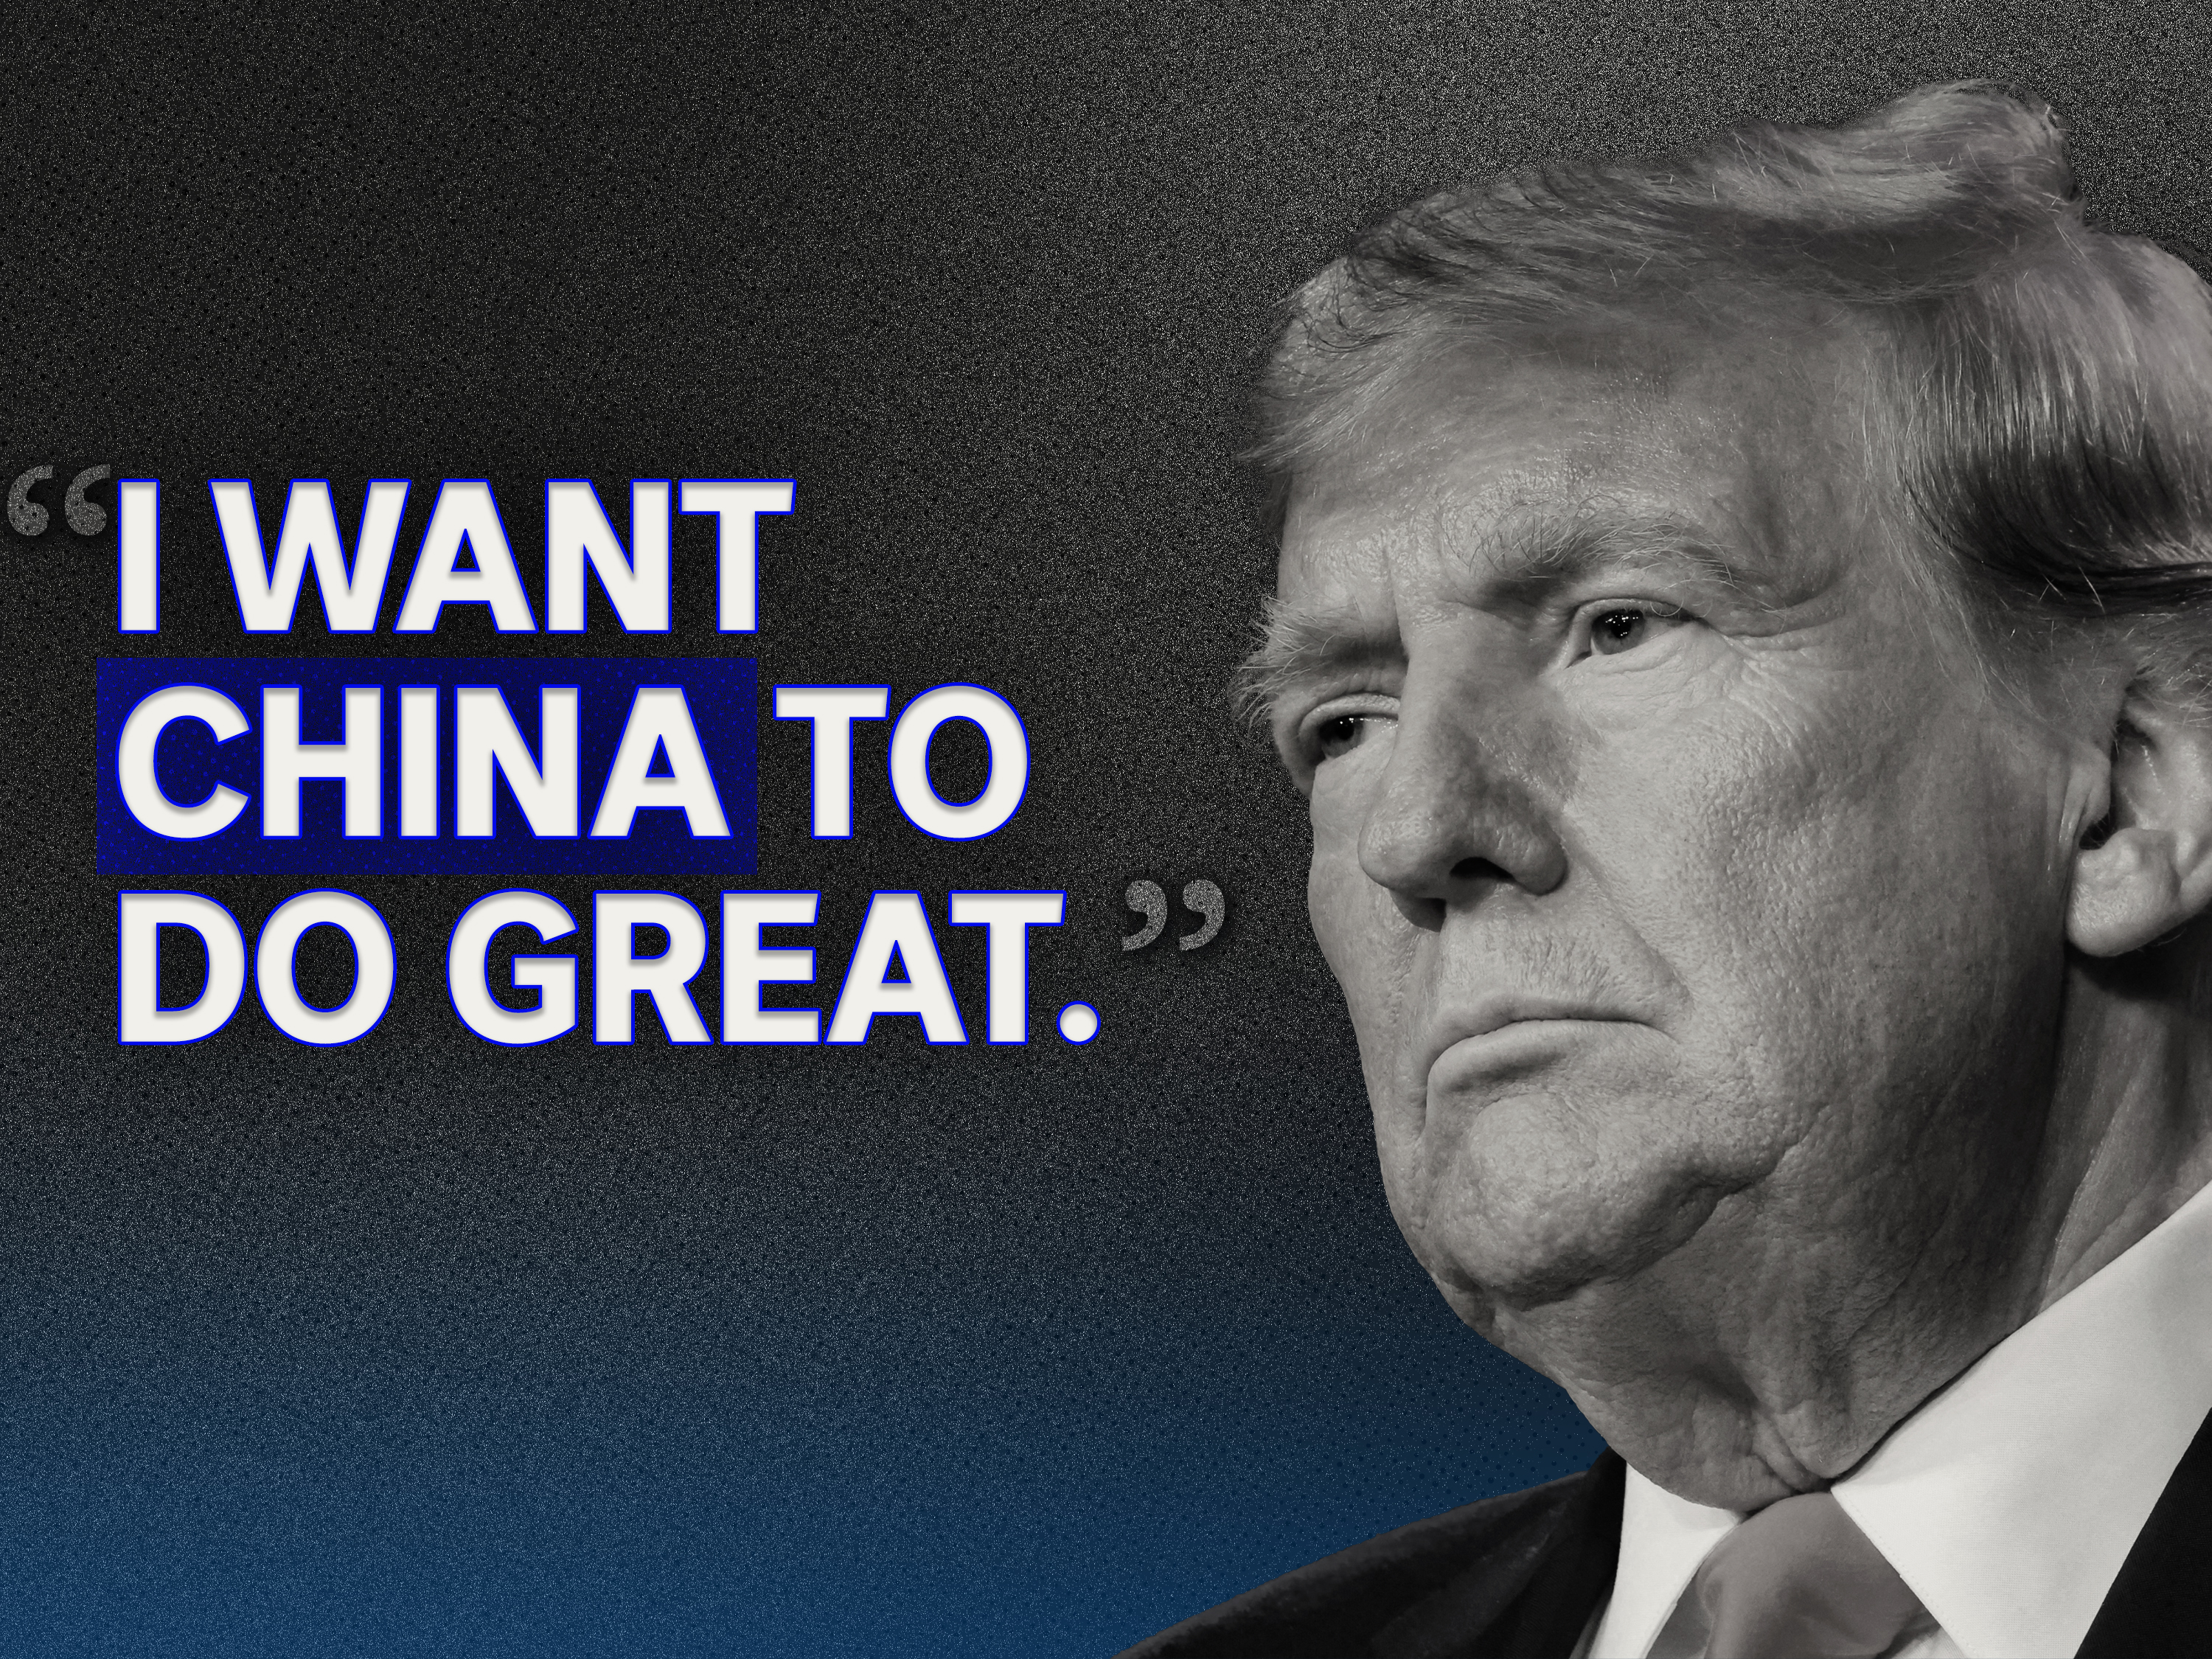 Donald Trump pictured with the words: I want China to do great.